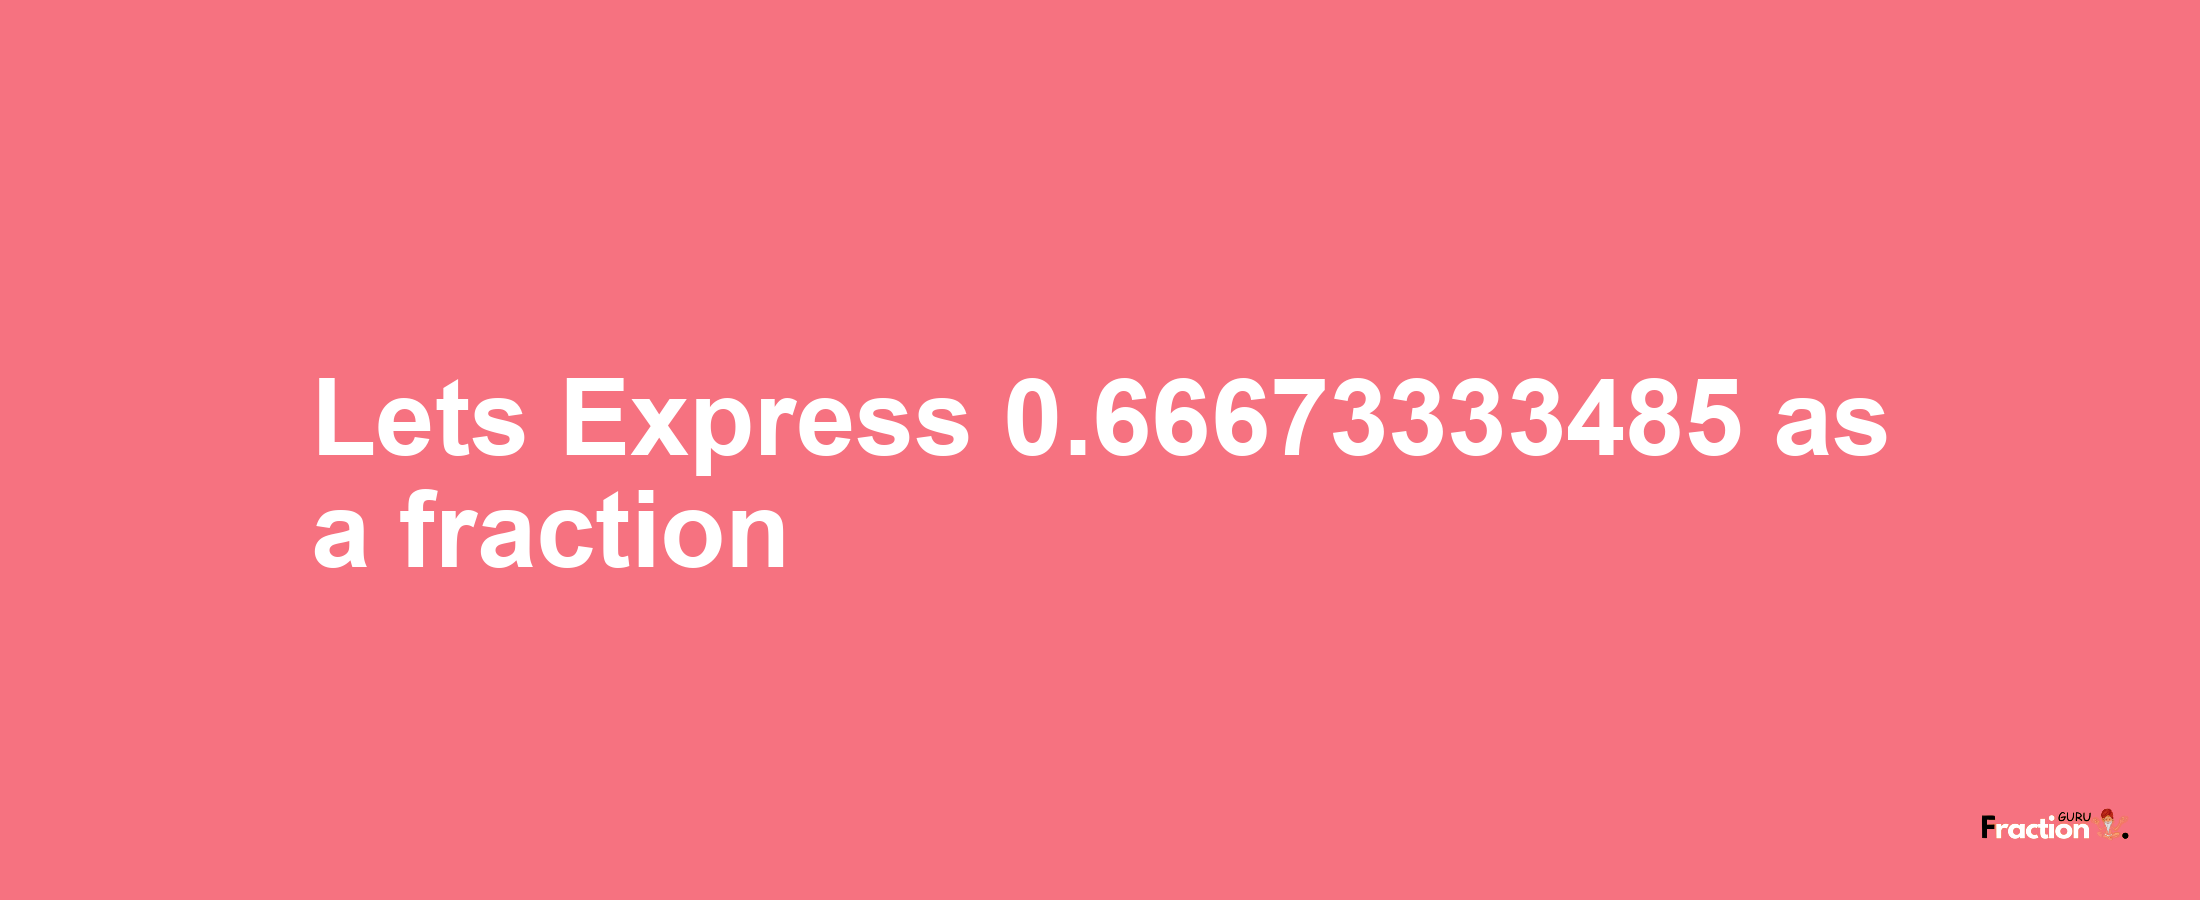 Lets Express 0.66673333485 as afraction